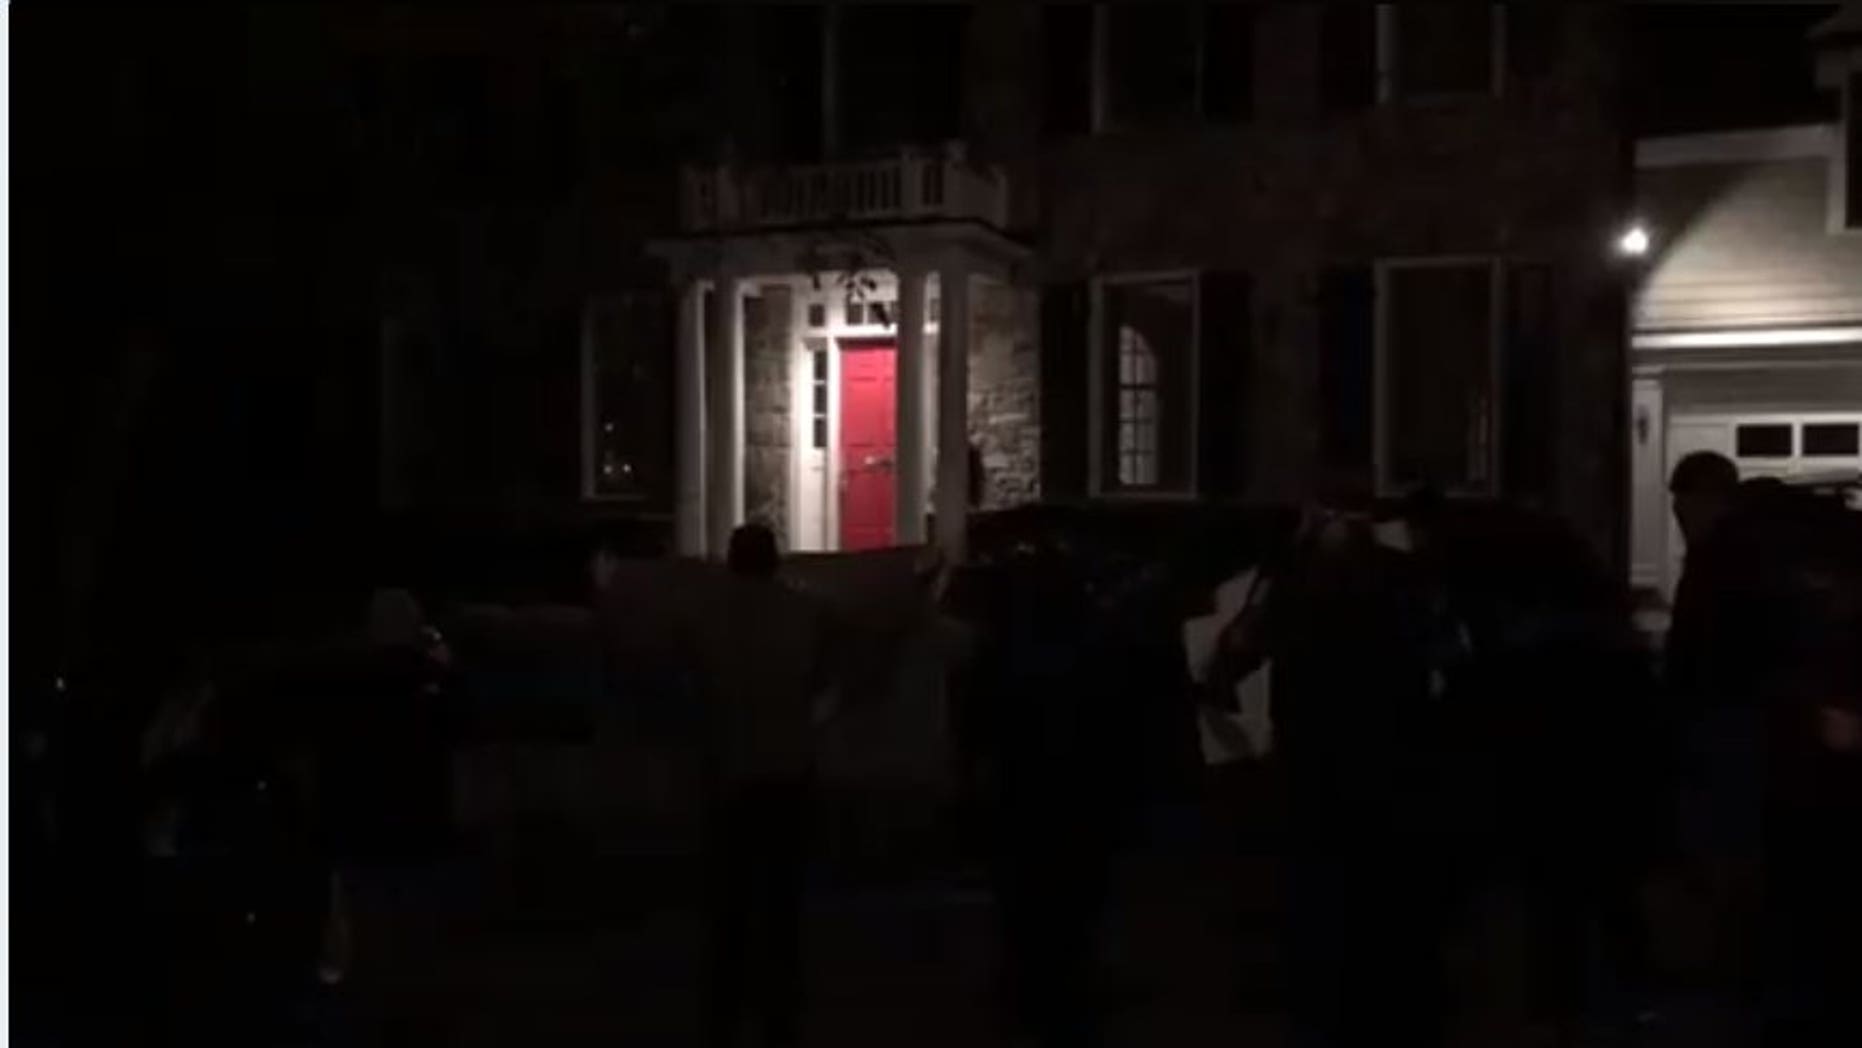 'They were threatening me and my family': Tucker Carlson's home targeted by protesters 